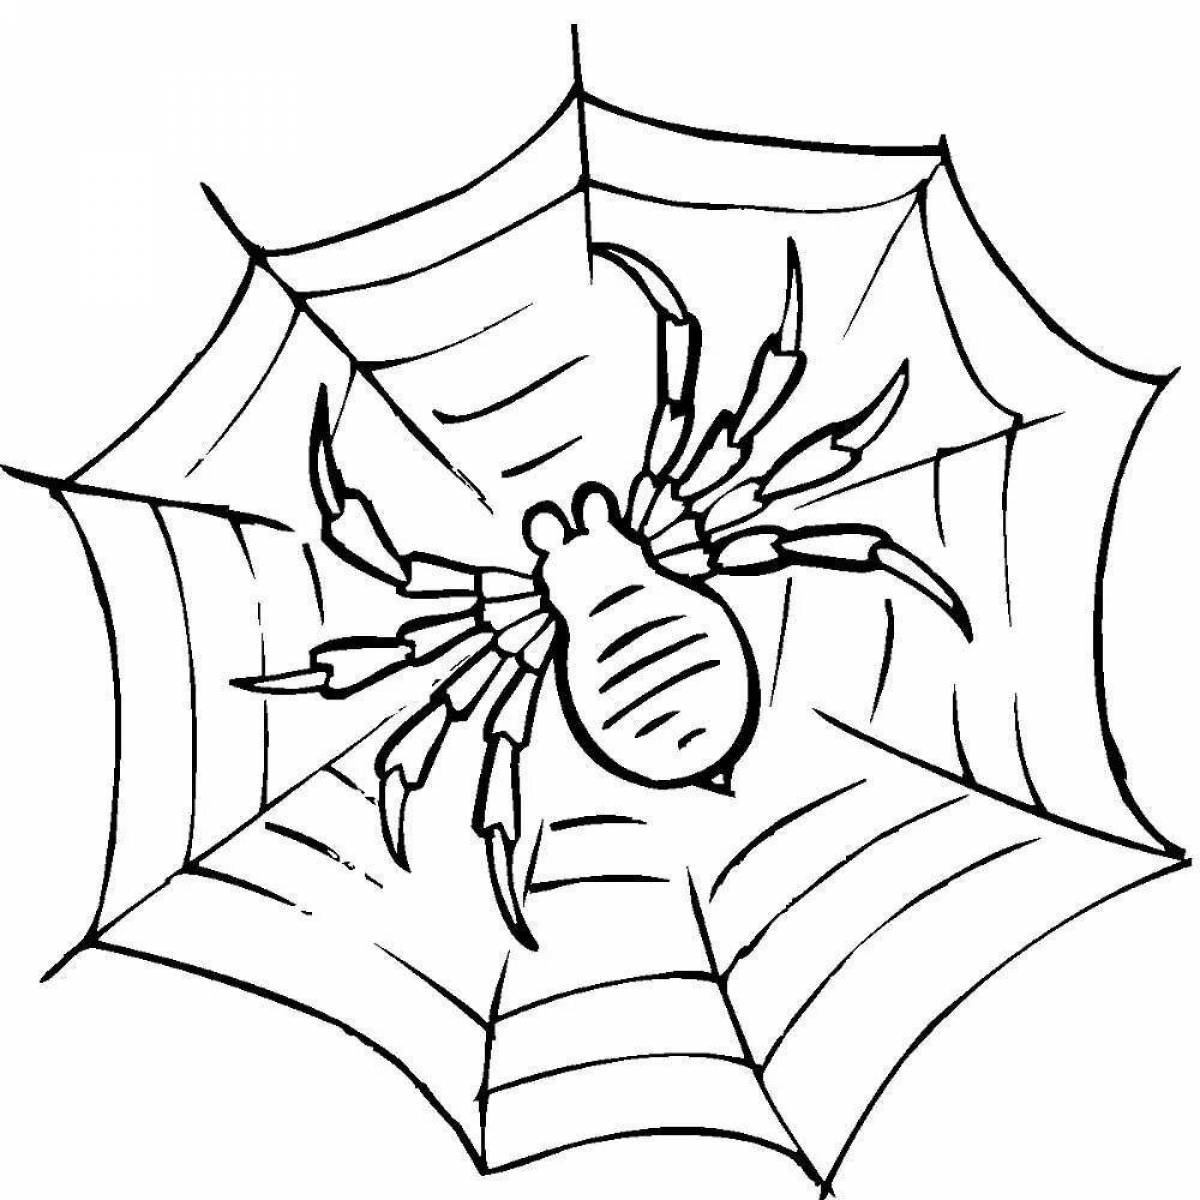 Exciting spider coloring page